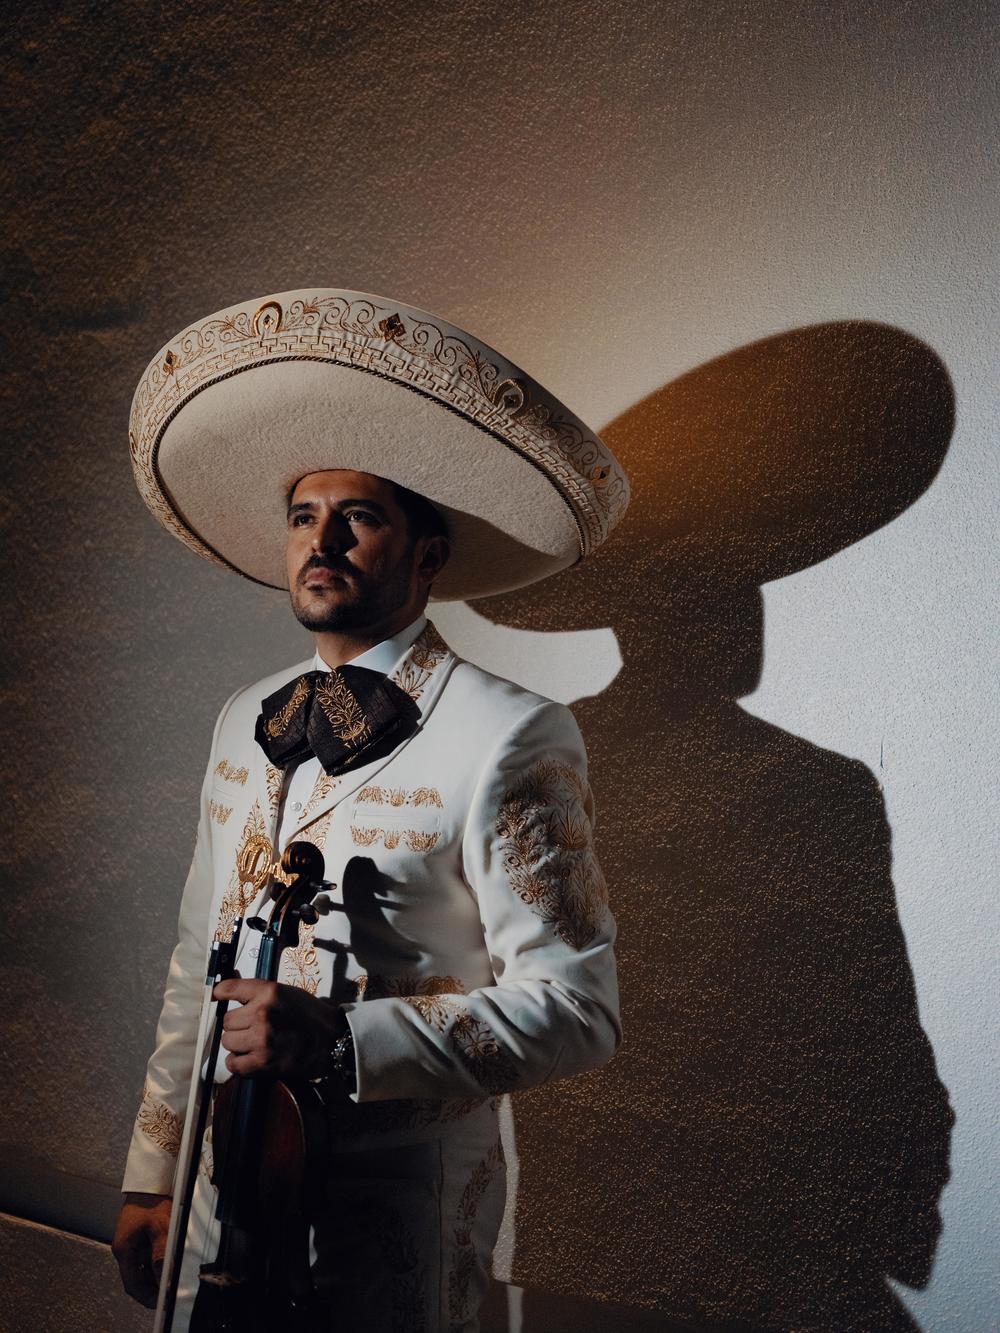 Jorge Alvarez, the lead of the Los Angeles-based Mariachi Los Reyes, poses for a photo at the MARIACHI USA festival in June.